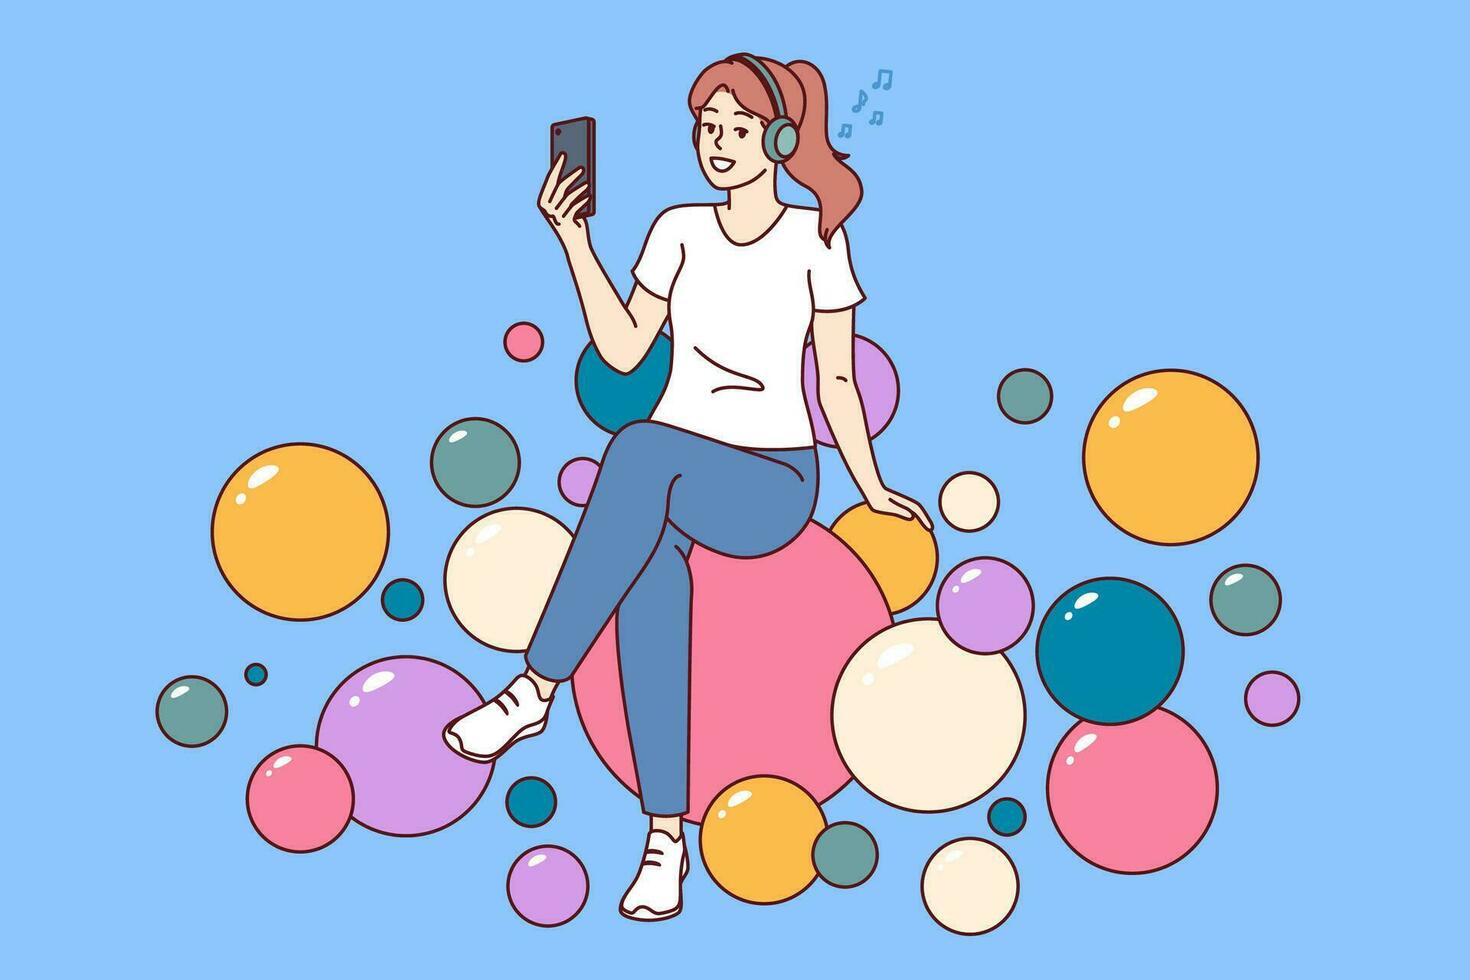 Teenager woman listening to music on headphones and holding mobile phone sitting on balloons vector